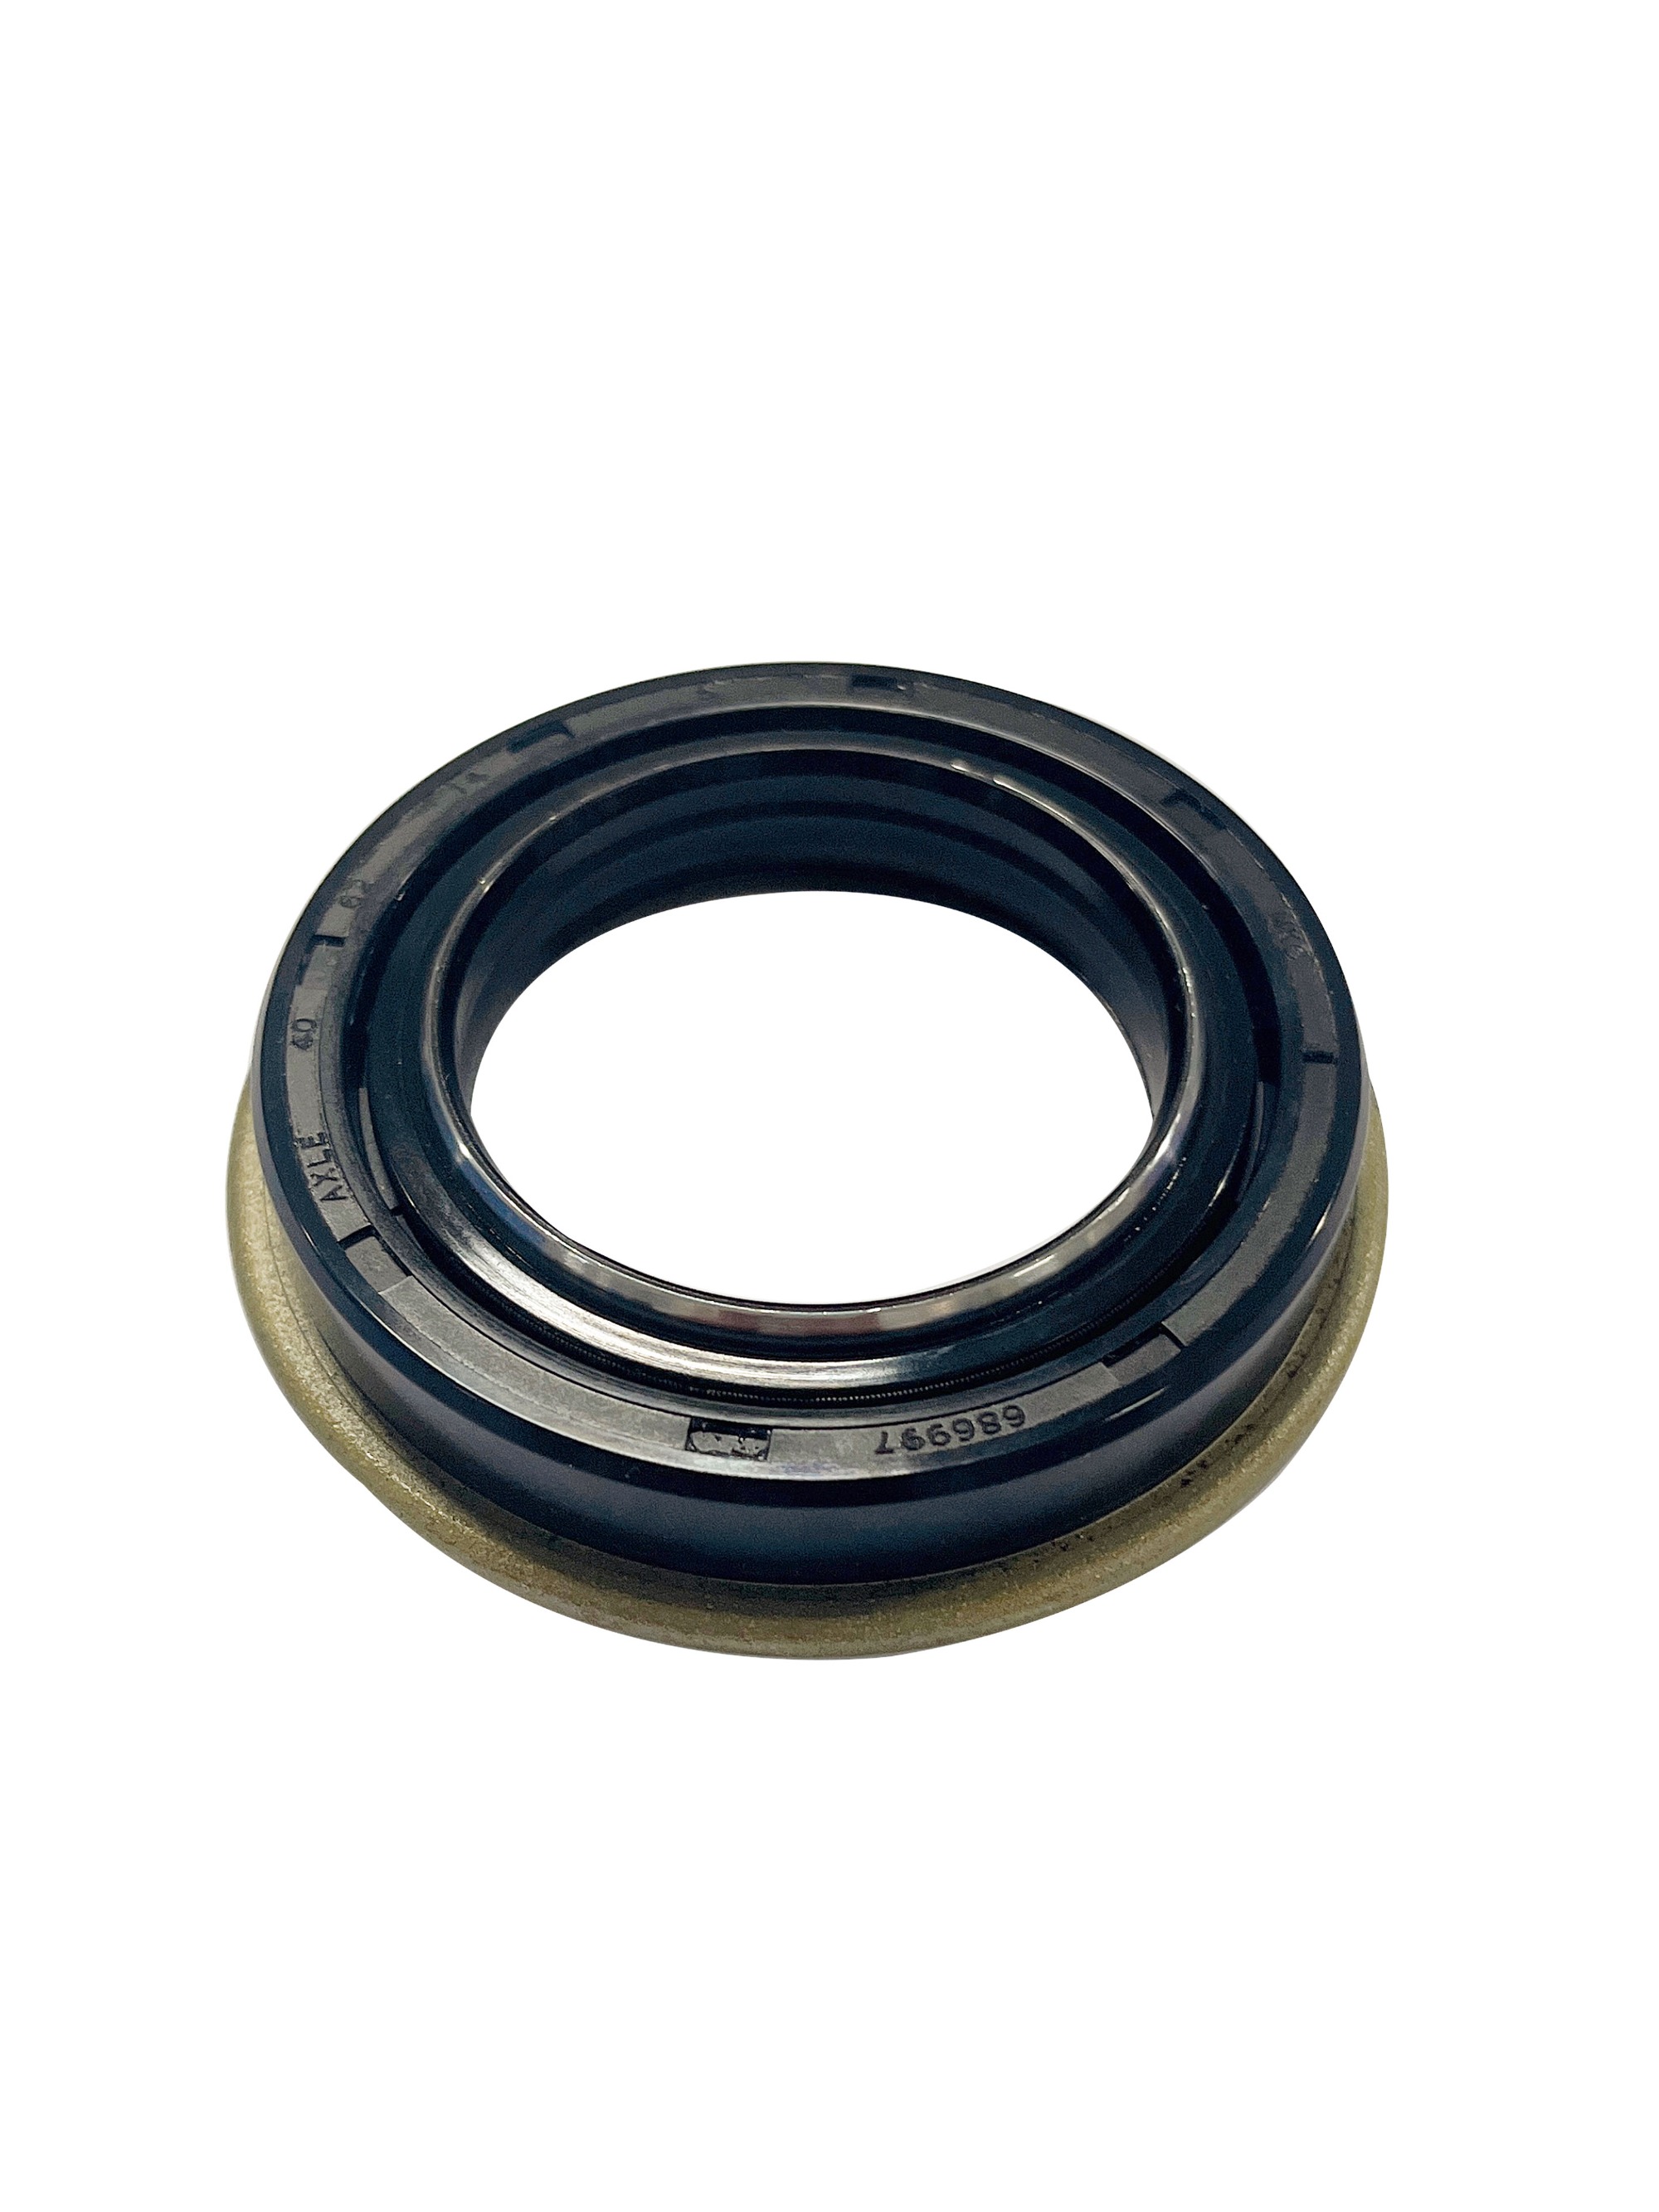 QLFY type oil seal